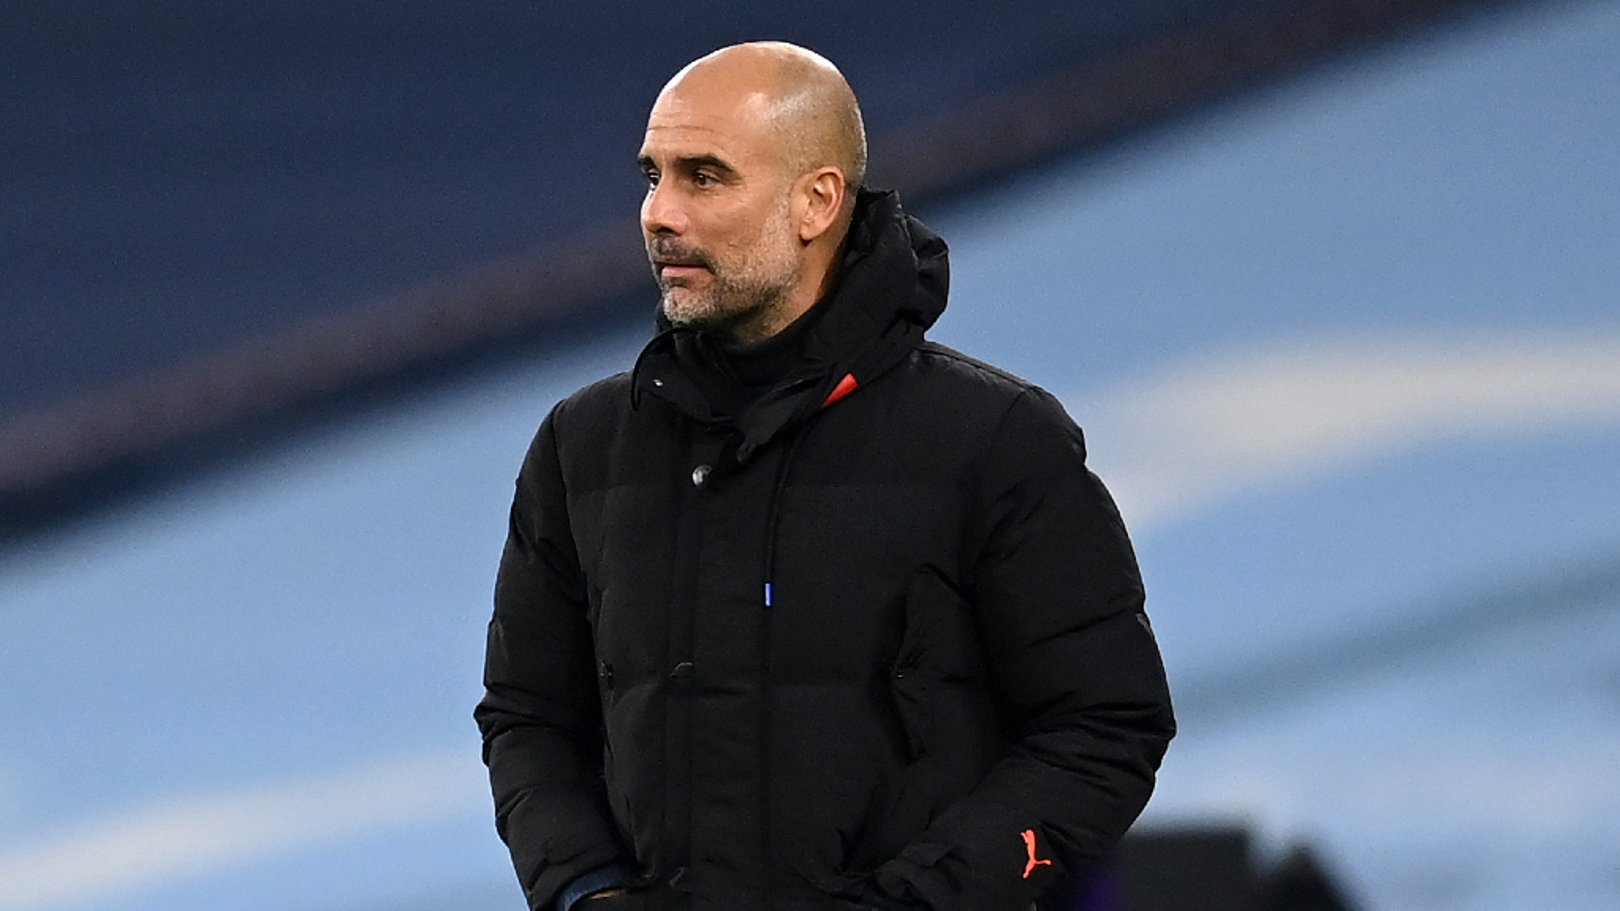 Guardiola: Performance and focus dictates selection